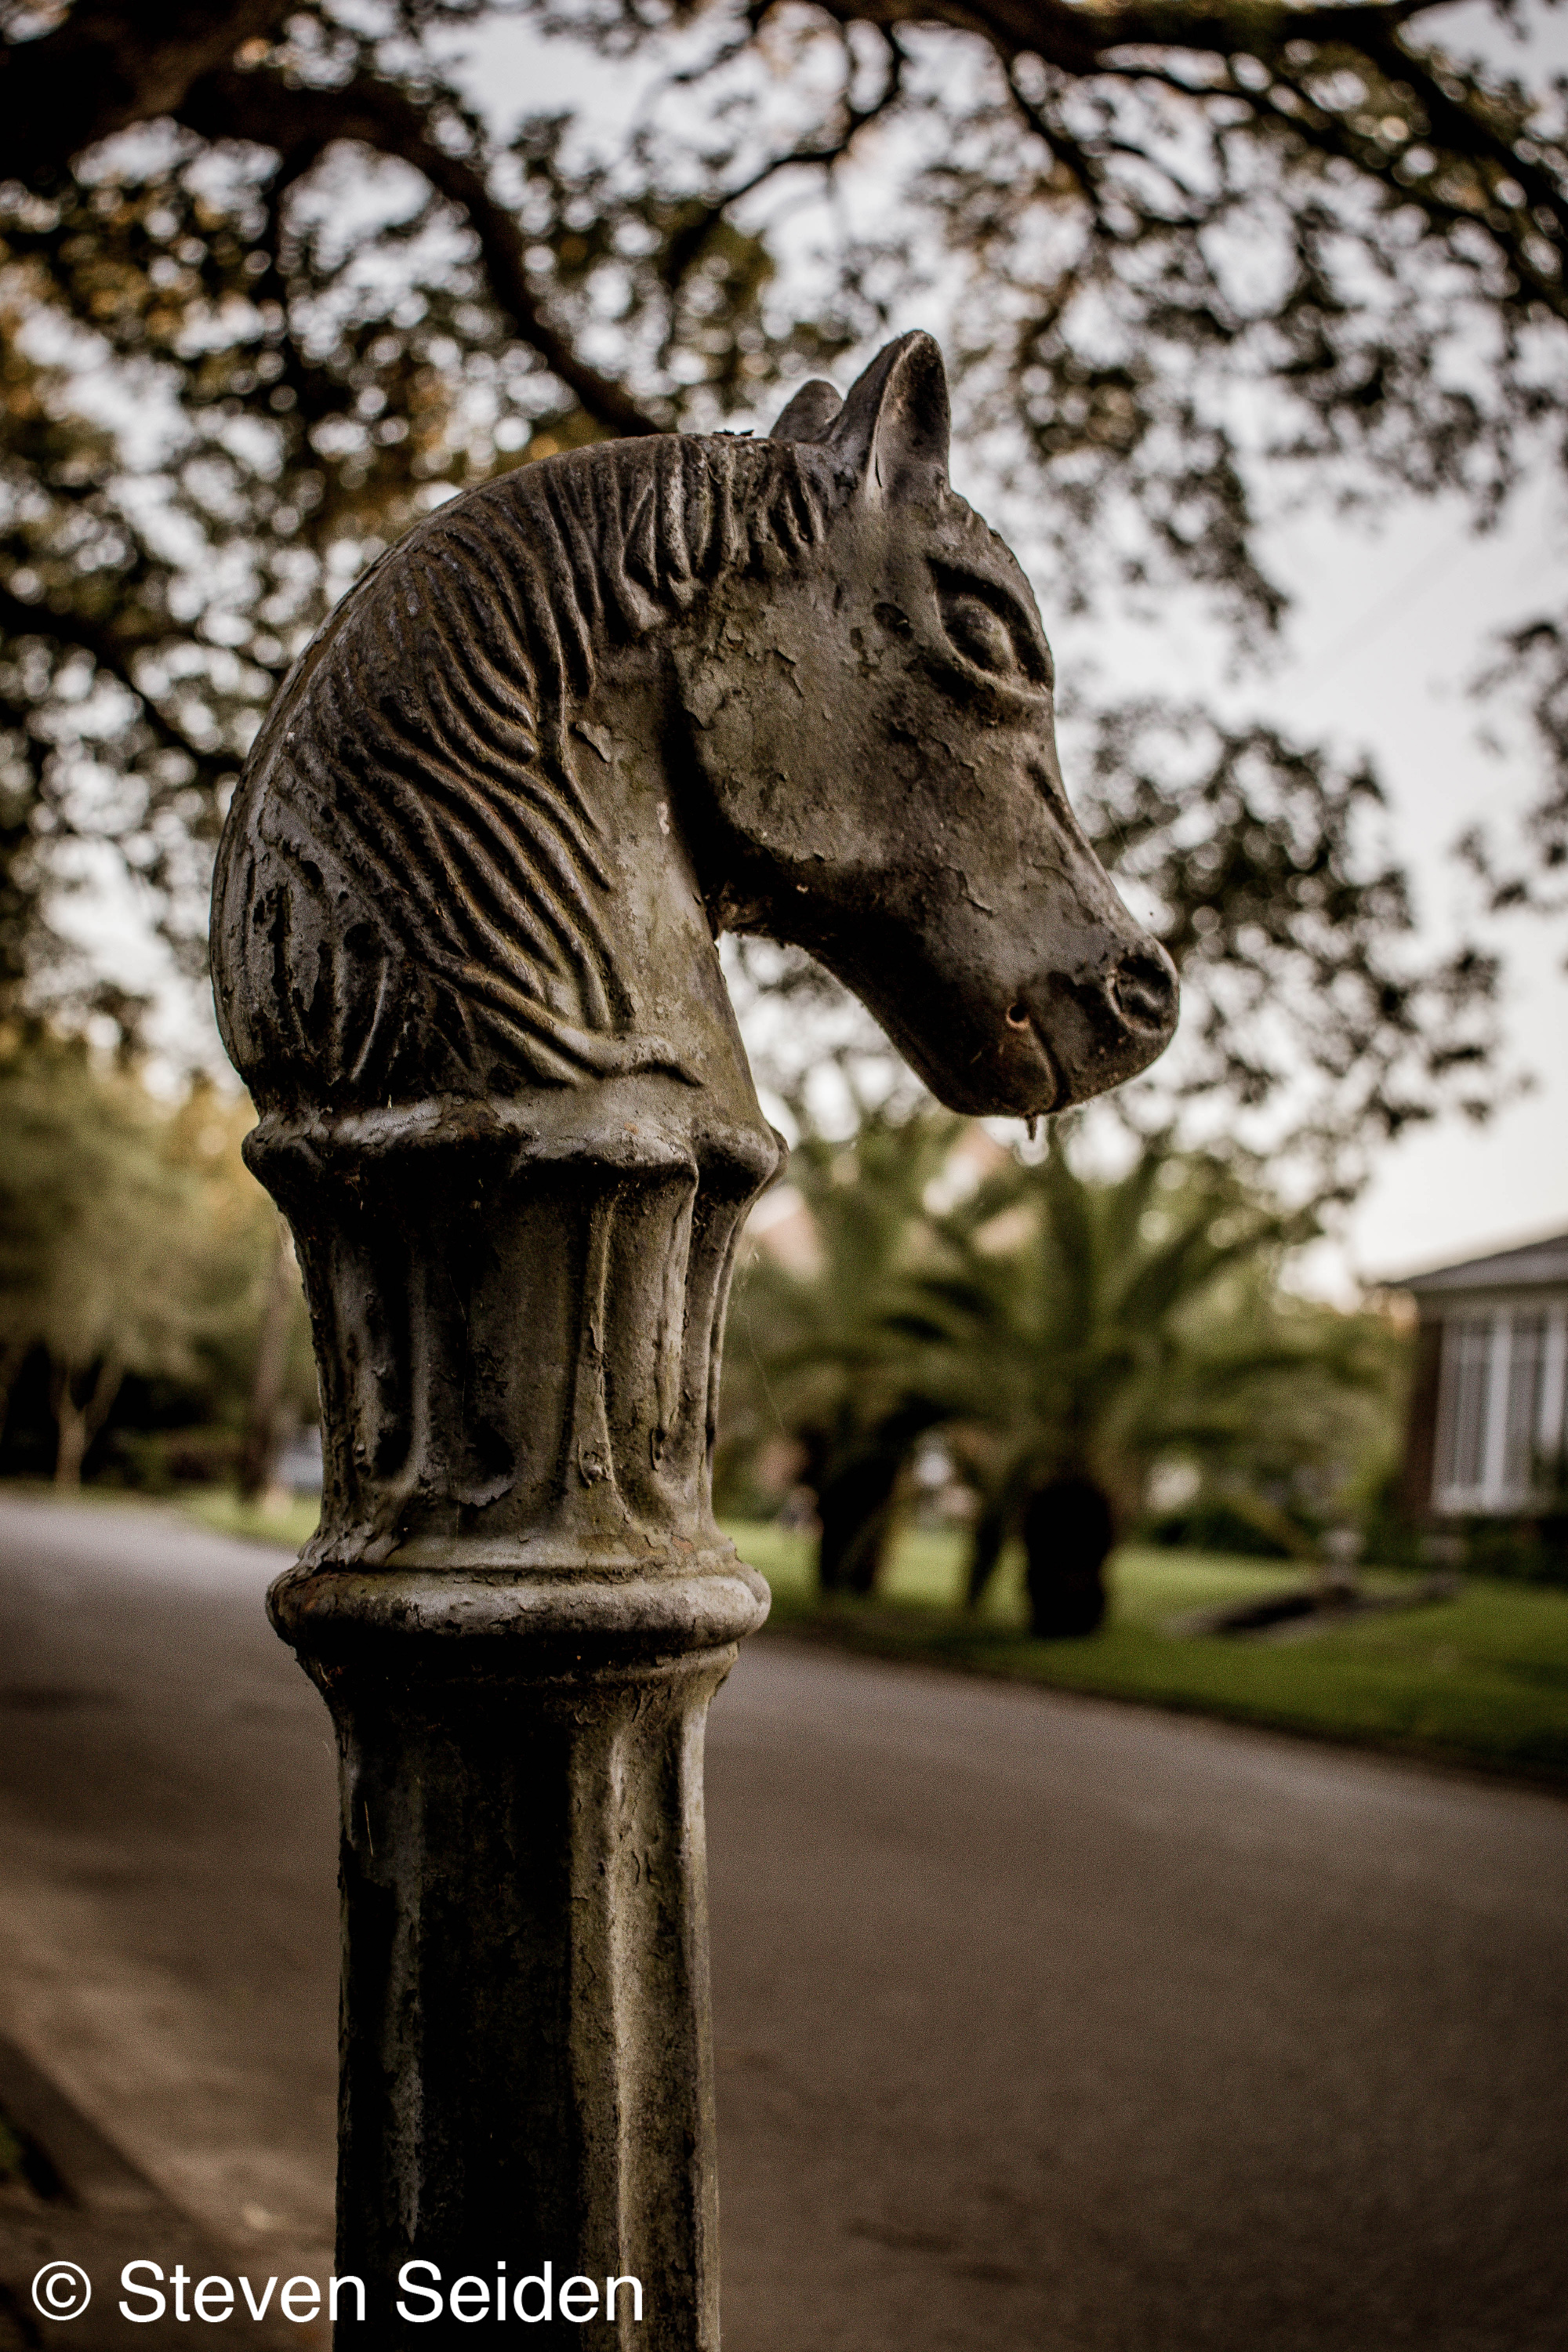 A picture of a hitching post.